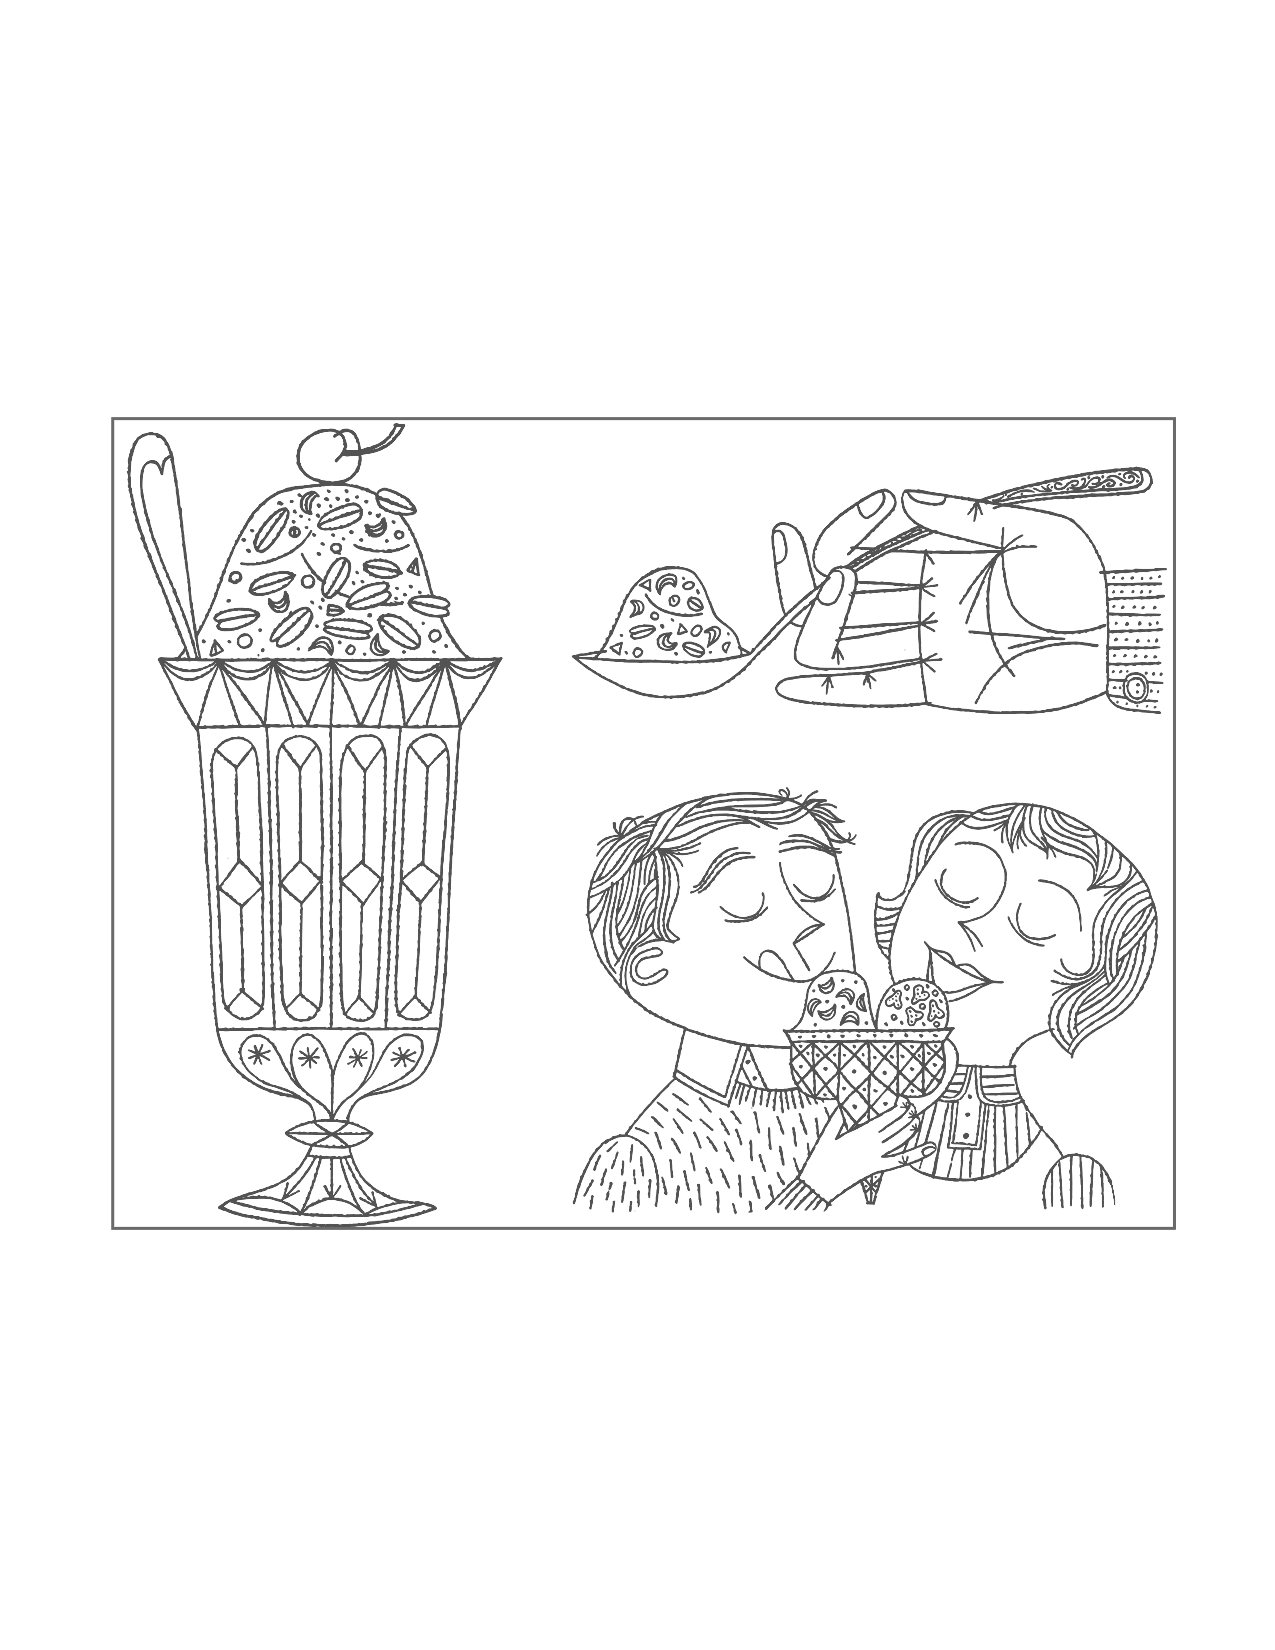 Sharing Ice Cream Coloring Page